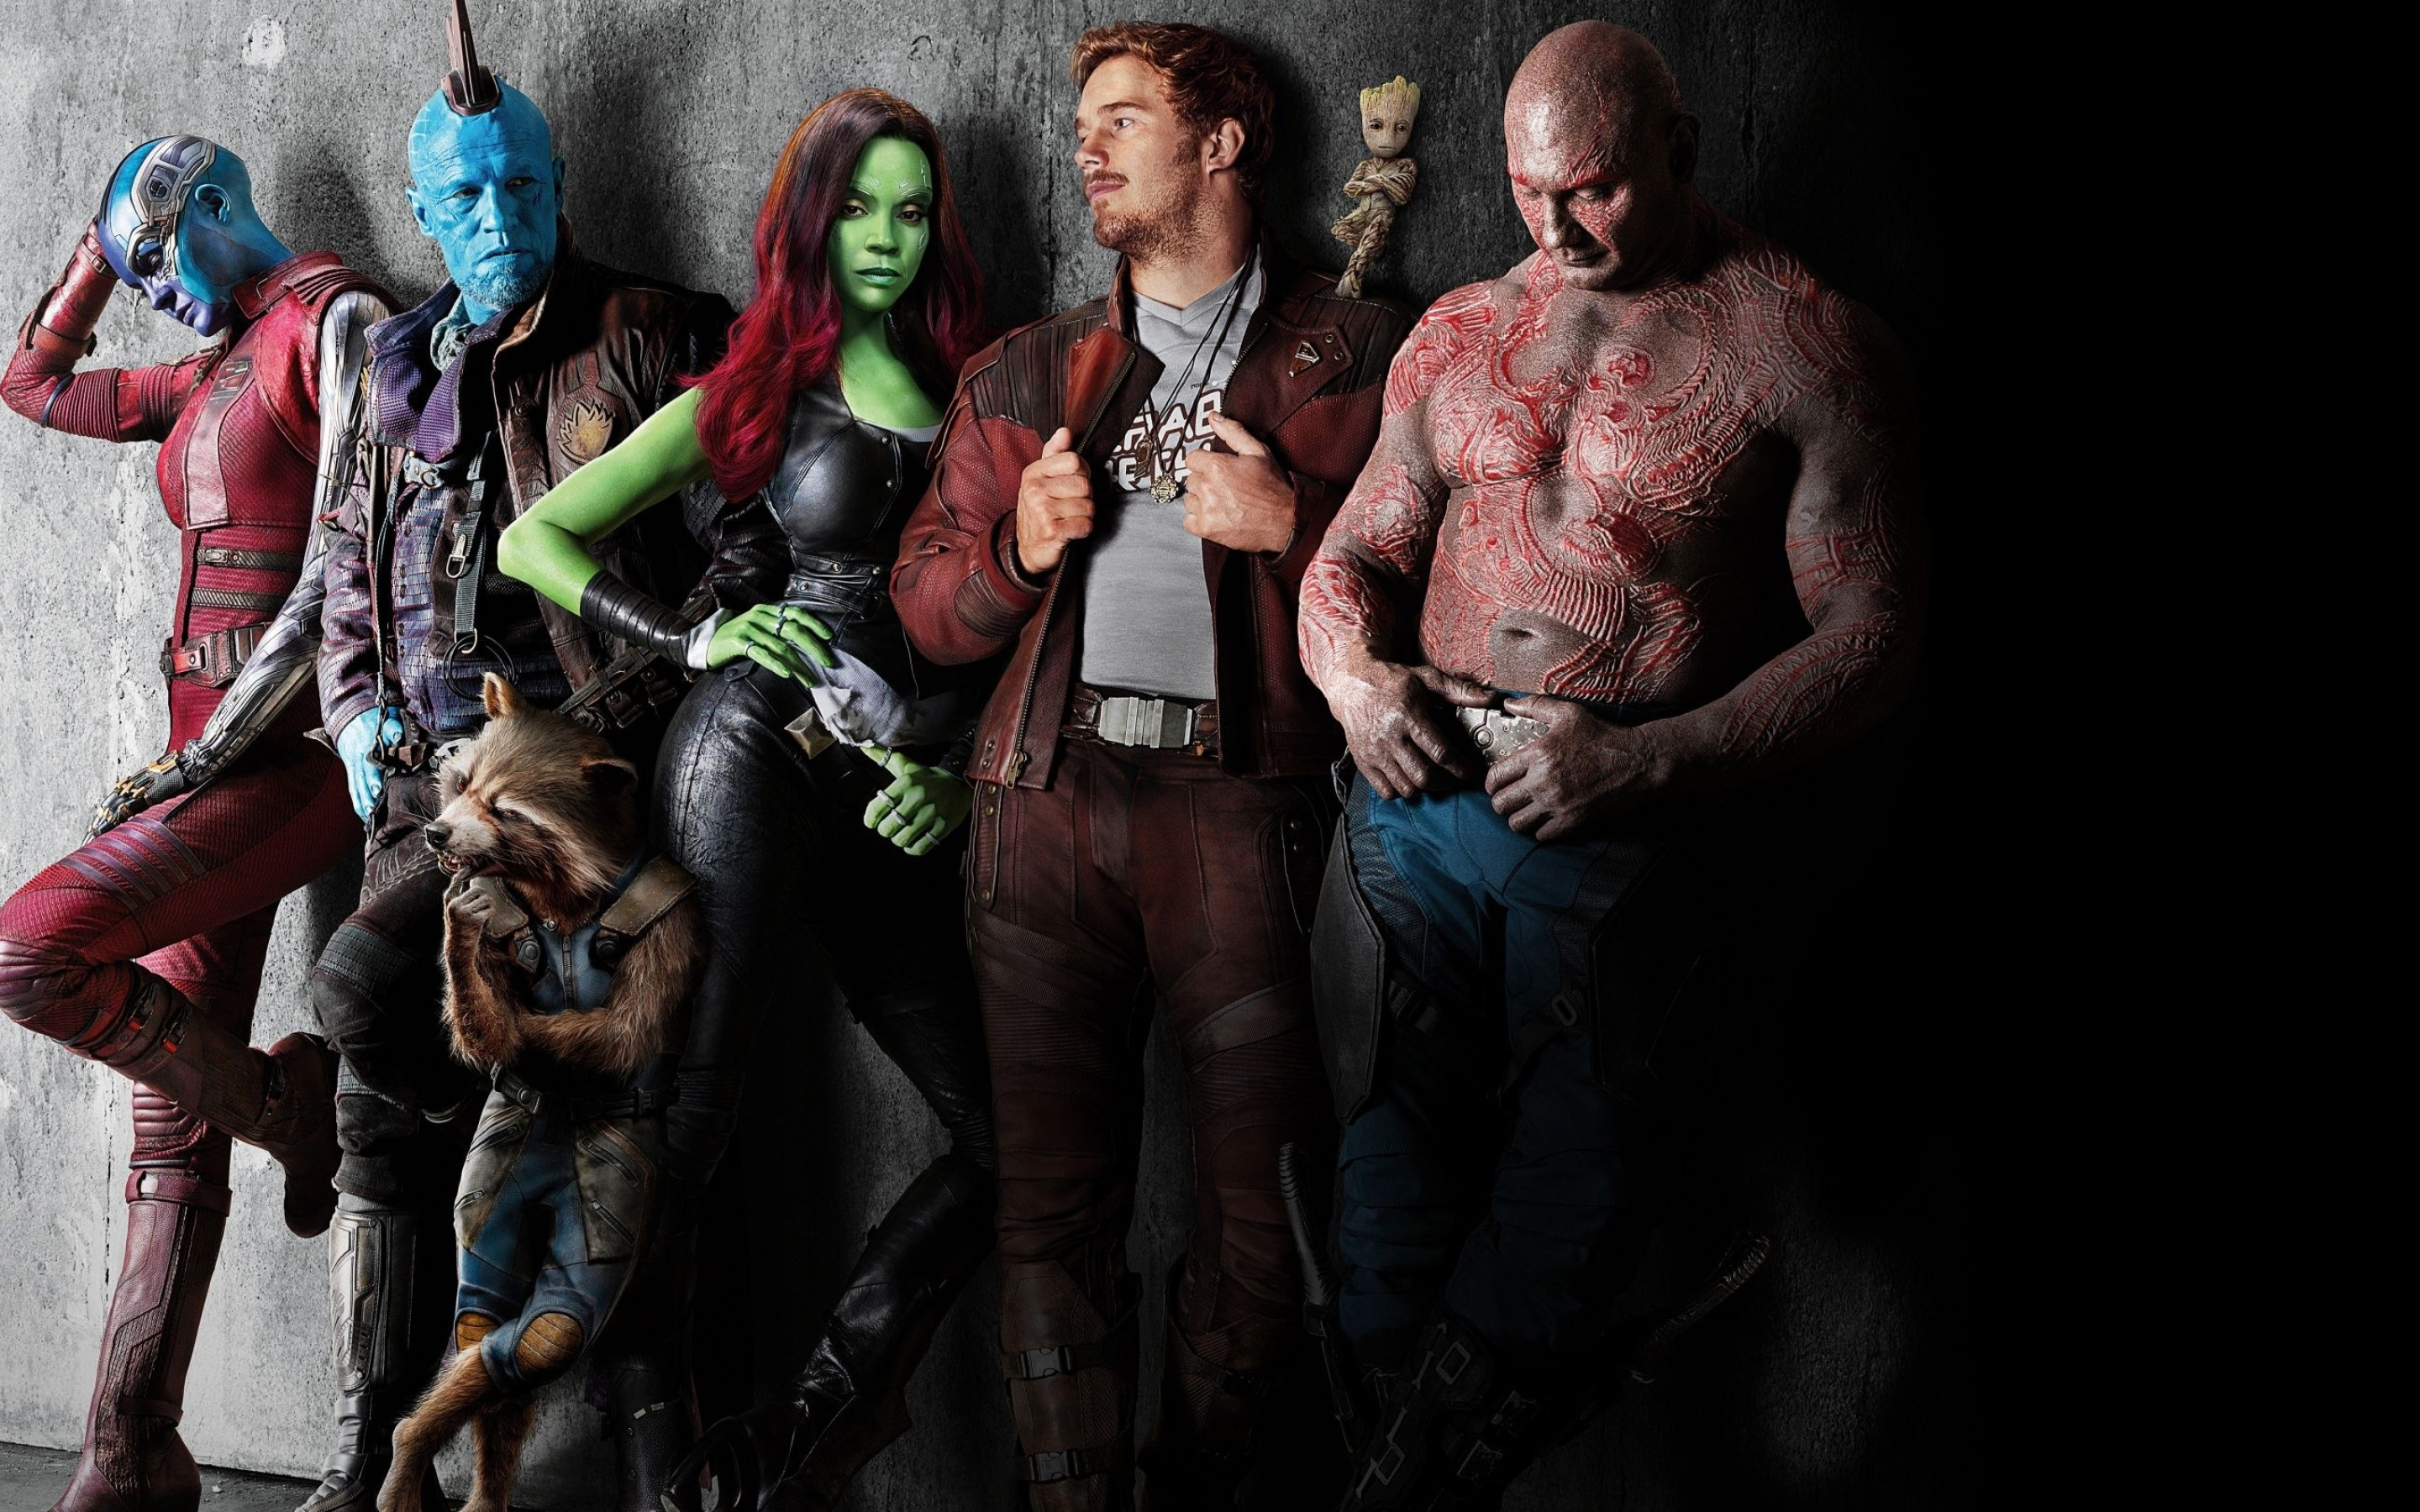 Guardians of the Galaxy 2, Epic wallpapers, Intergalactic characters, Dynamic team, 2880x1800 HD Desktop